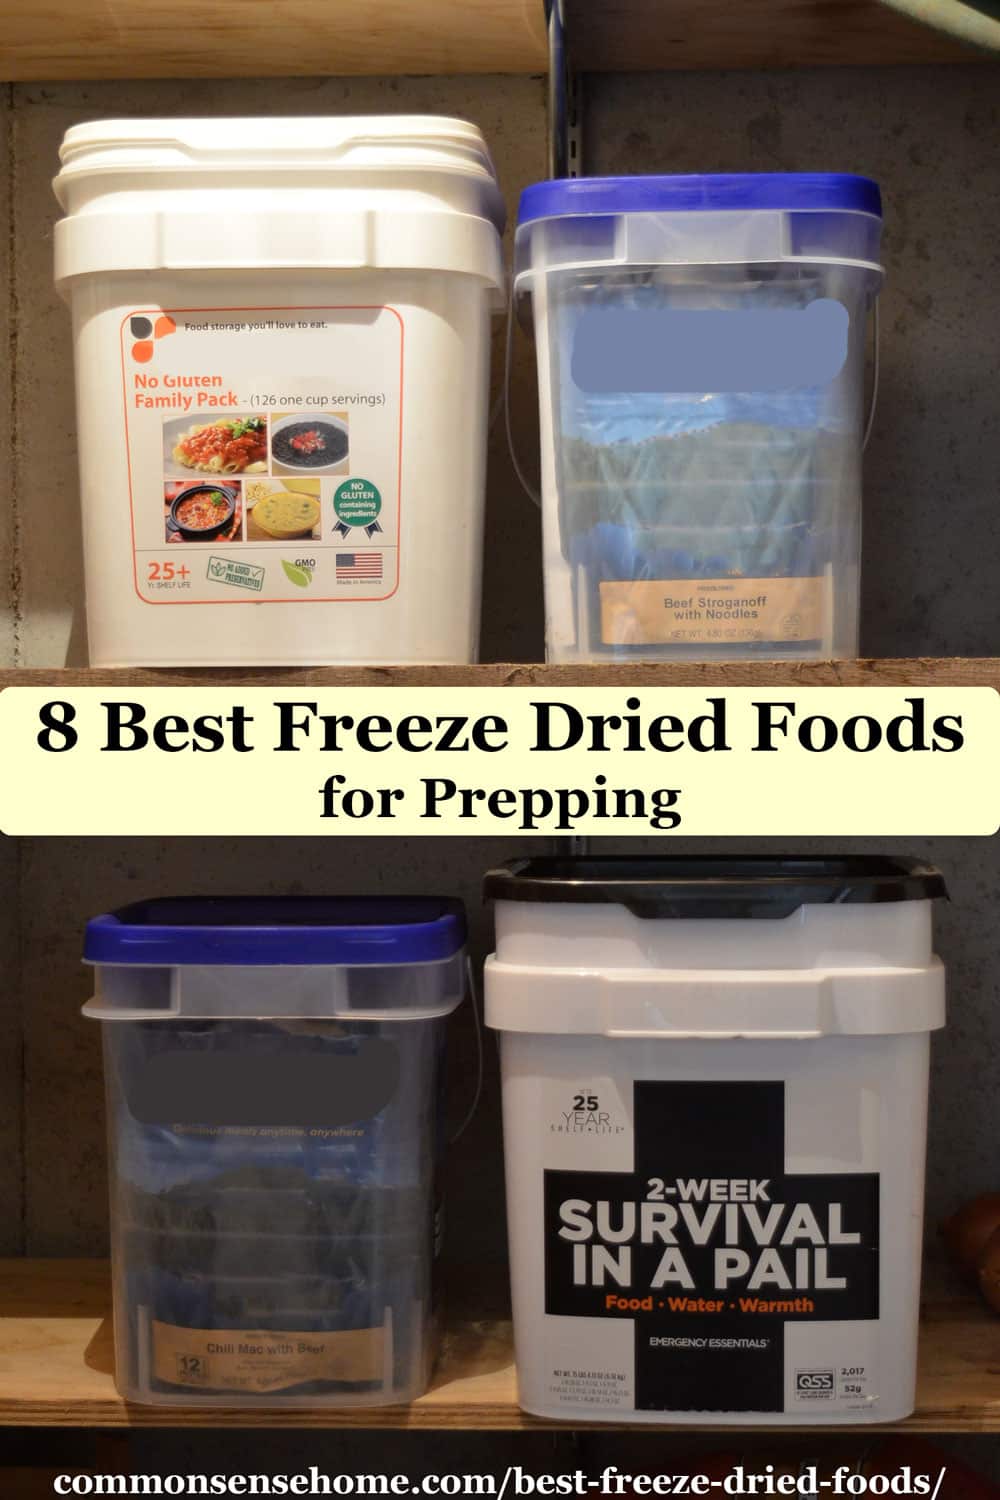 8 Best Freeze Dried Foods for Prepping